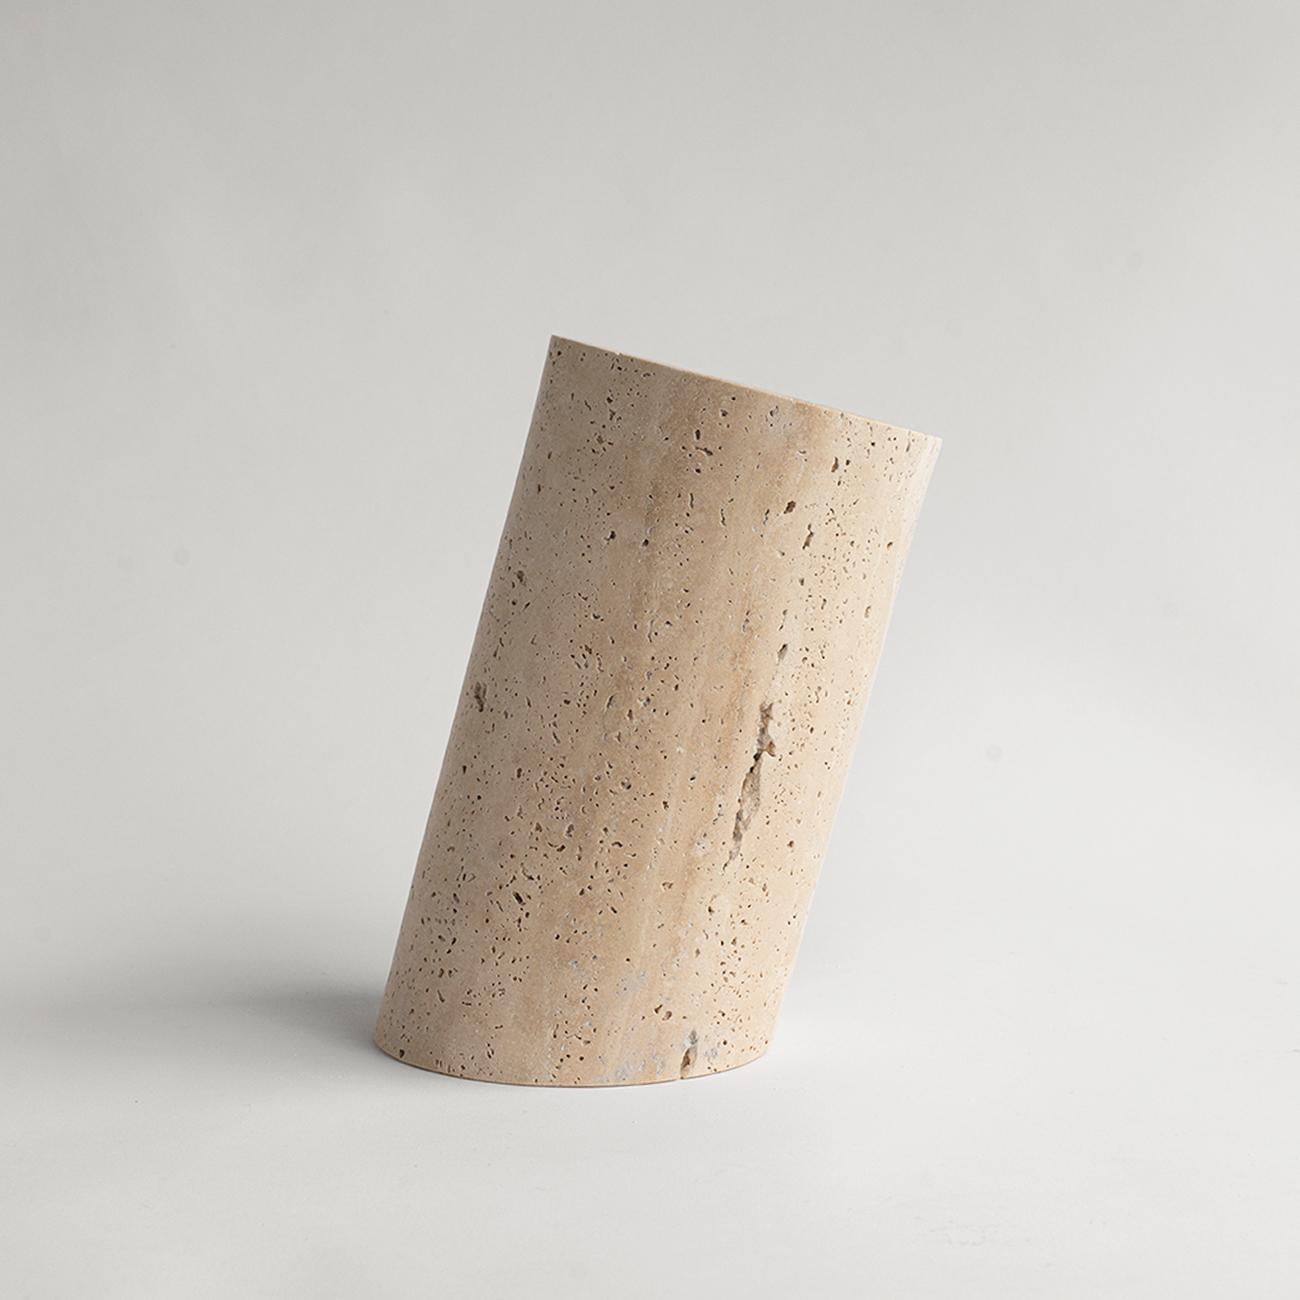 This travertine angled wine cooler is designed by us and hand crafted by the artisans within the fair-trade principles.

The natural properties of travertine will keep your wine chilled with no need for ice - you can also place this marble cooler